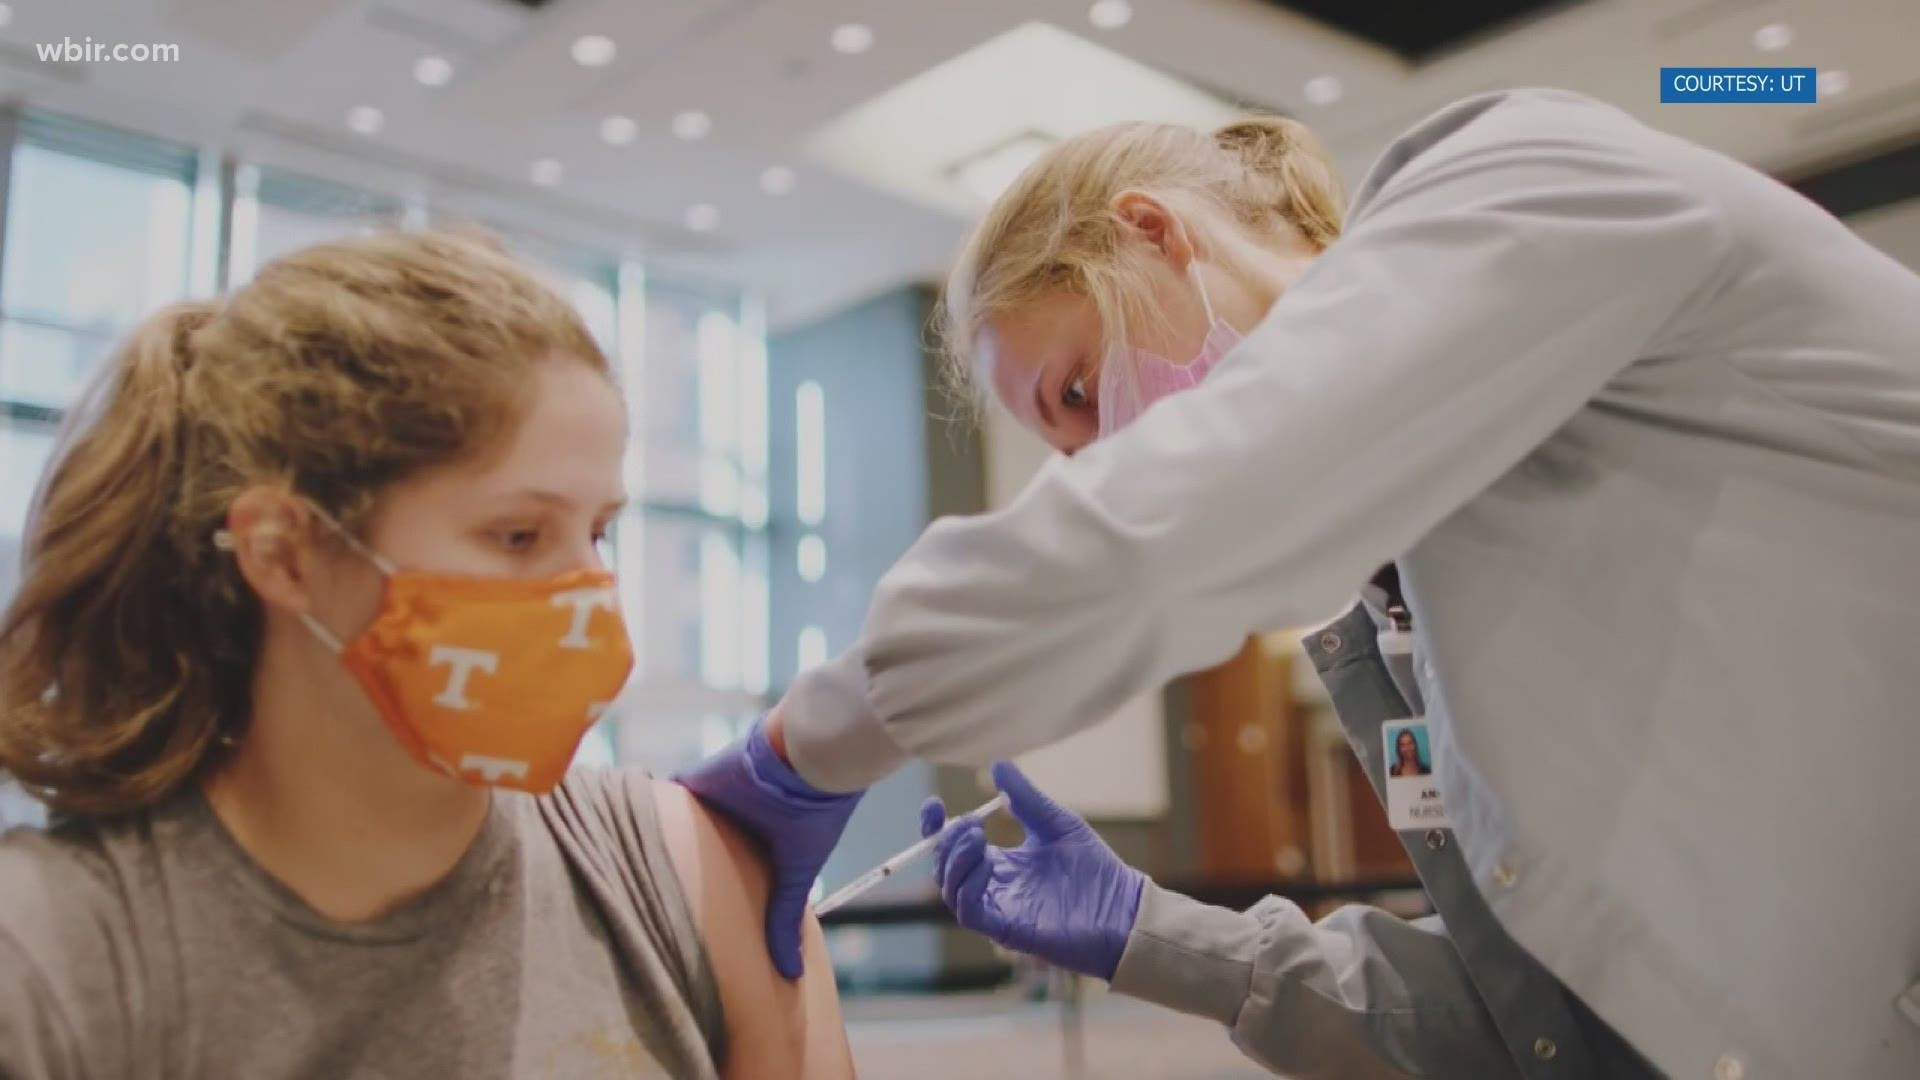 The milestone dose was given during a public clinic on Friday, around two months after the University of Tennessee's first round of vaccinations.